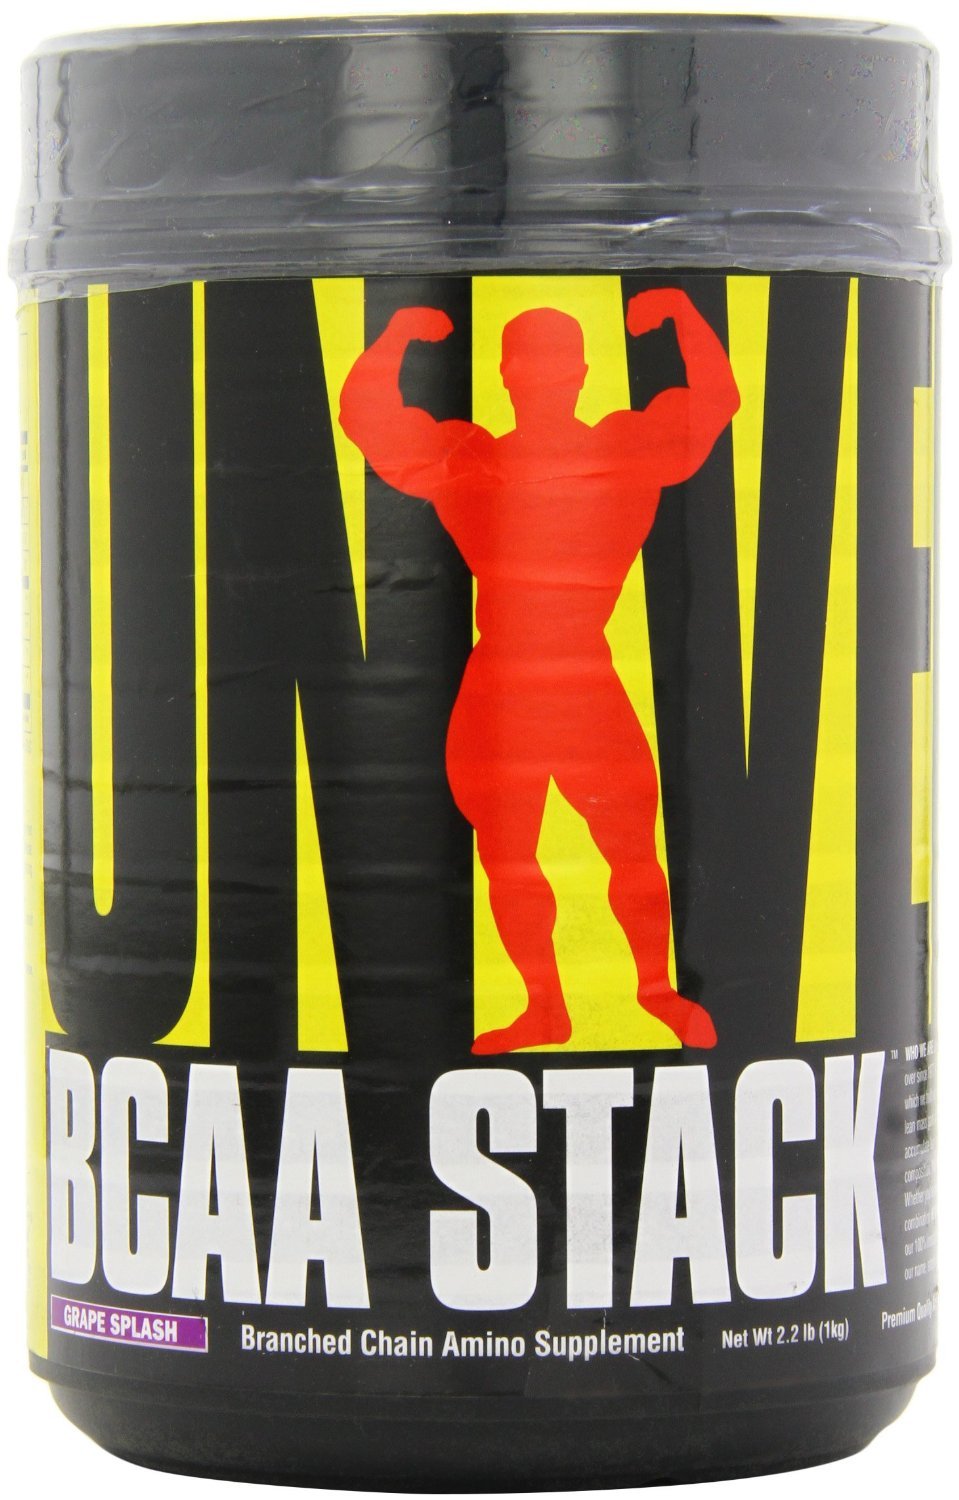 BCAA Stack, 1000 g, Universal Nutrition. BCAA. Weight Loss recovery Anti-catabolic properties Lean muscle mass 